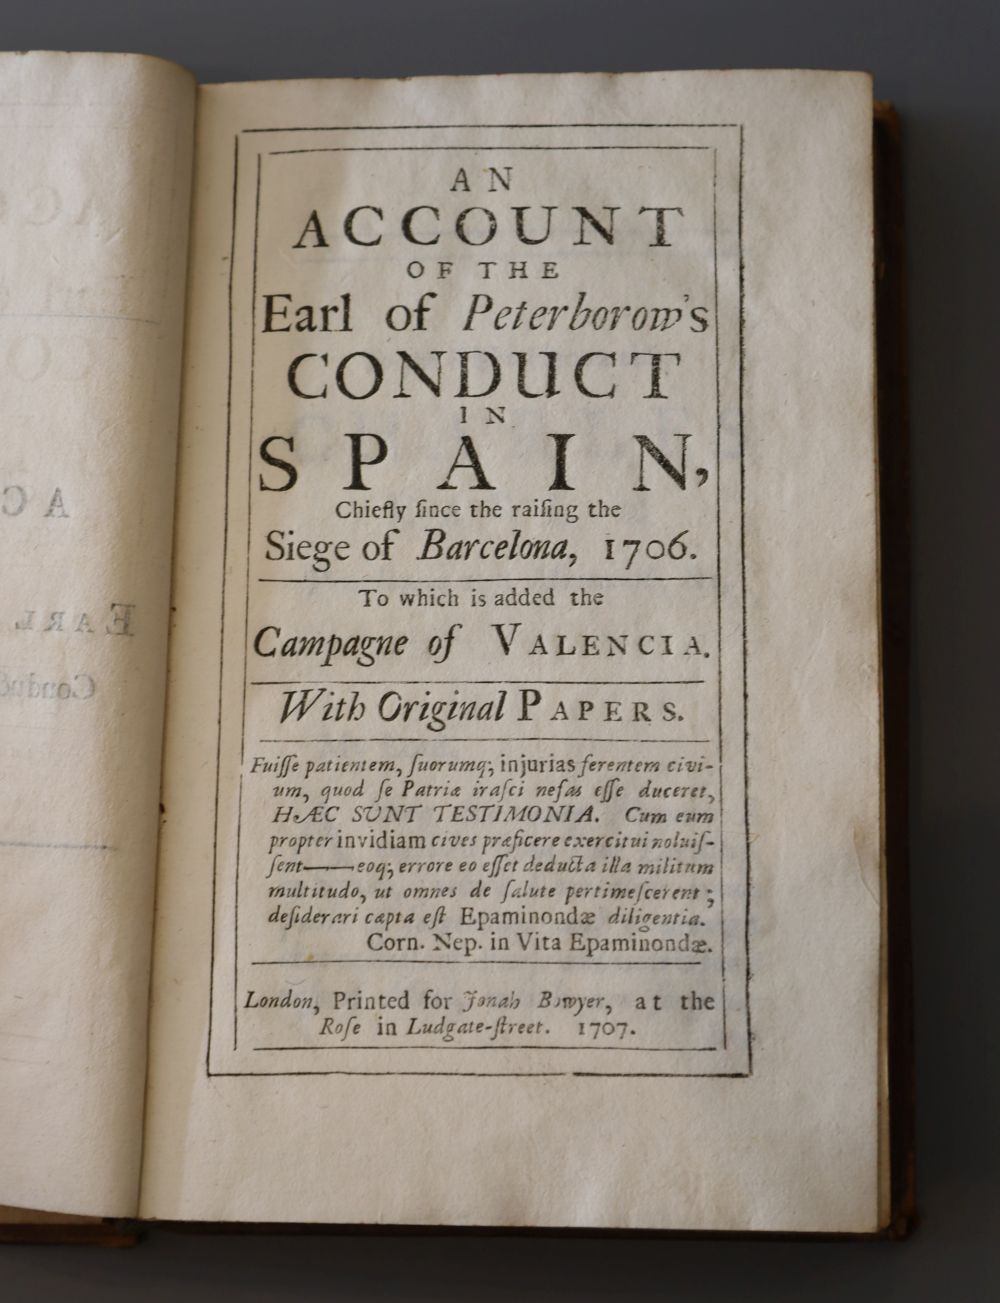 Friend, John - Account of the Earl of Peterborows conduct in Spain, calf, 8vo, front board detached, Jonah Bowyer, London, 1707